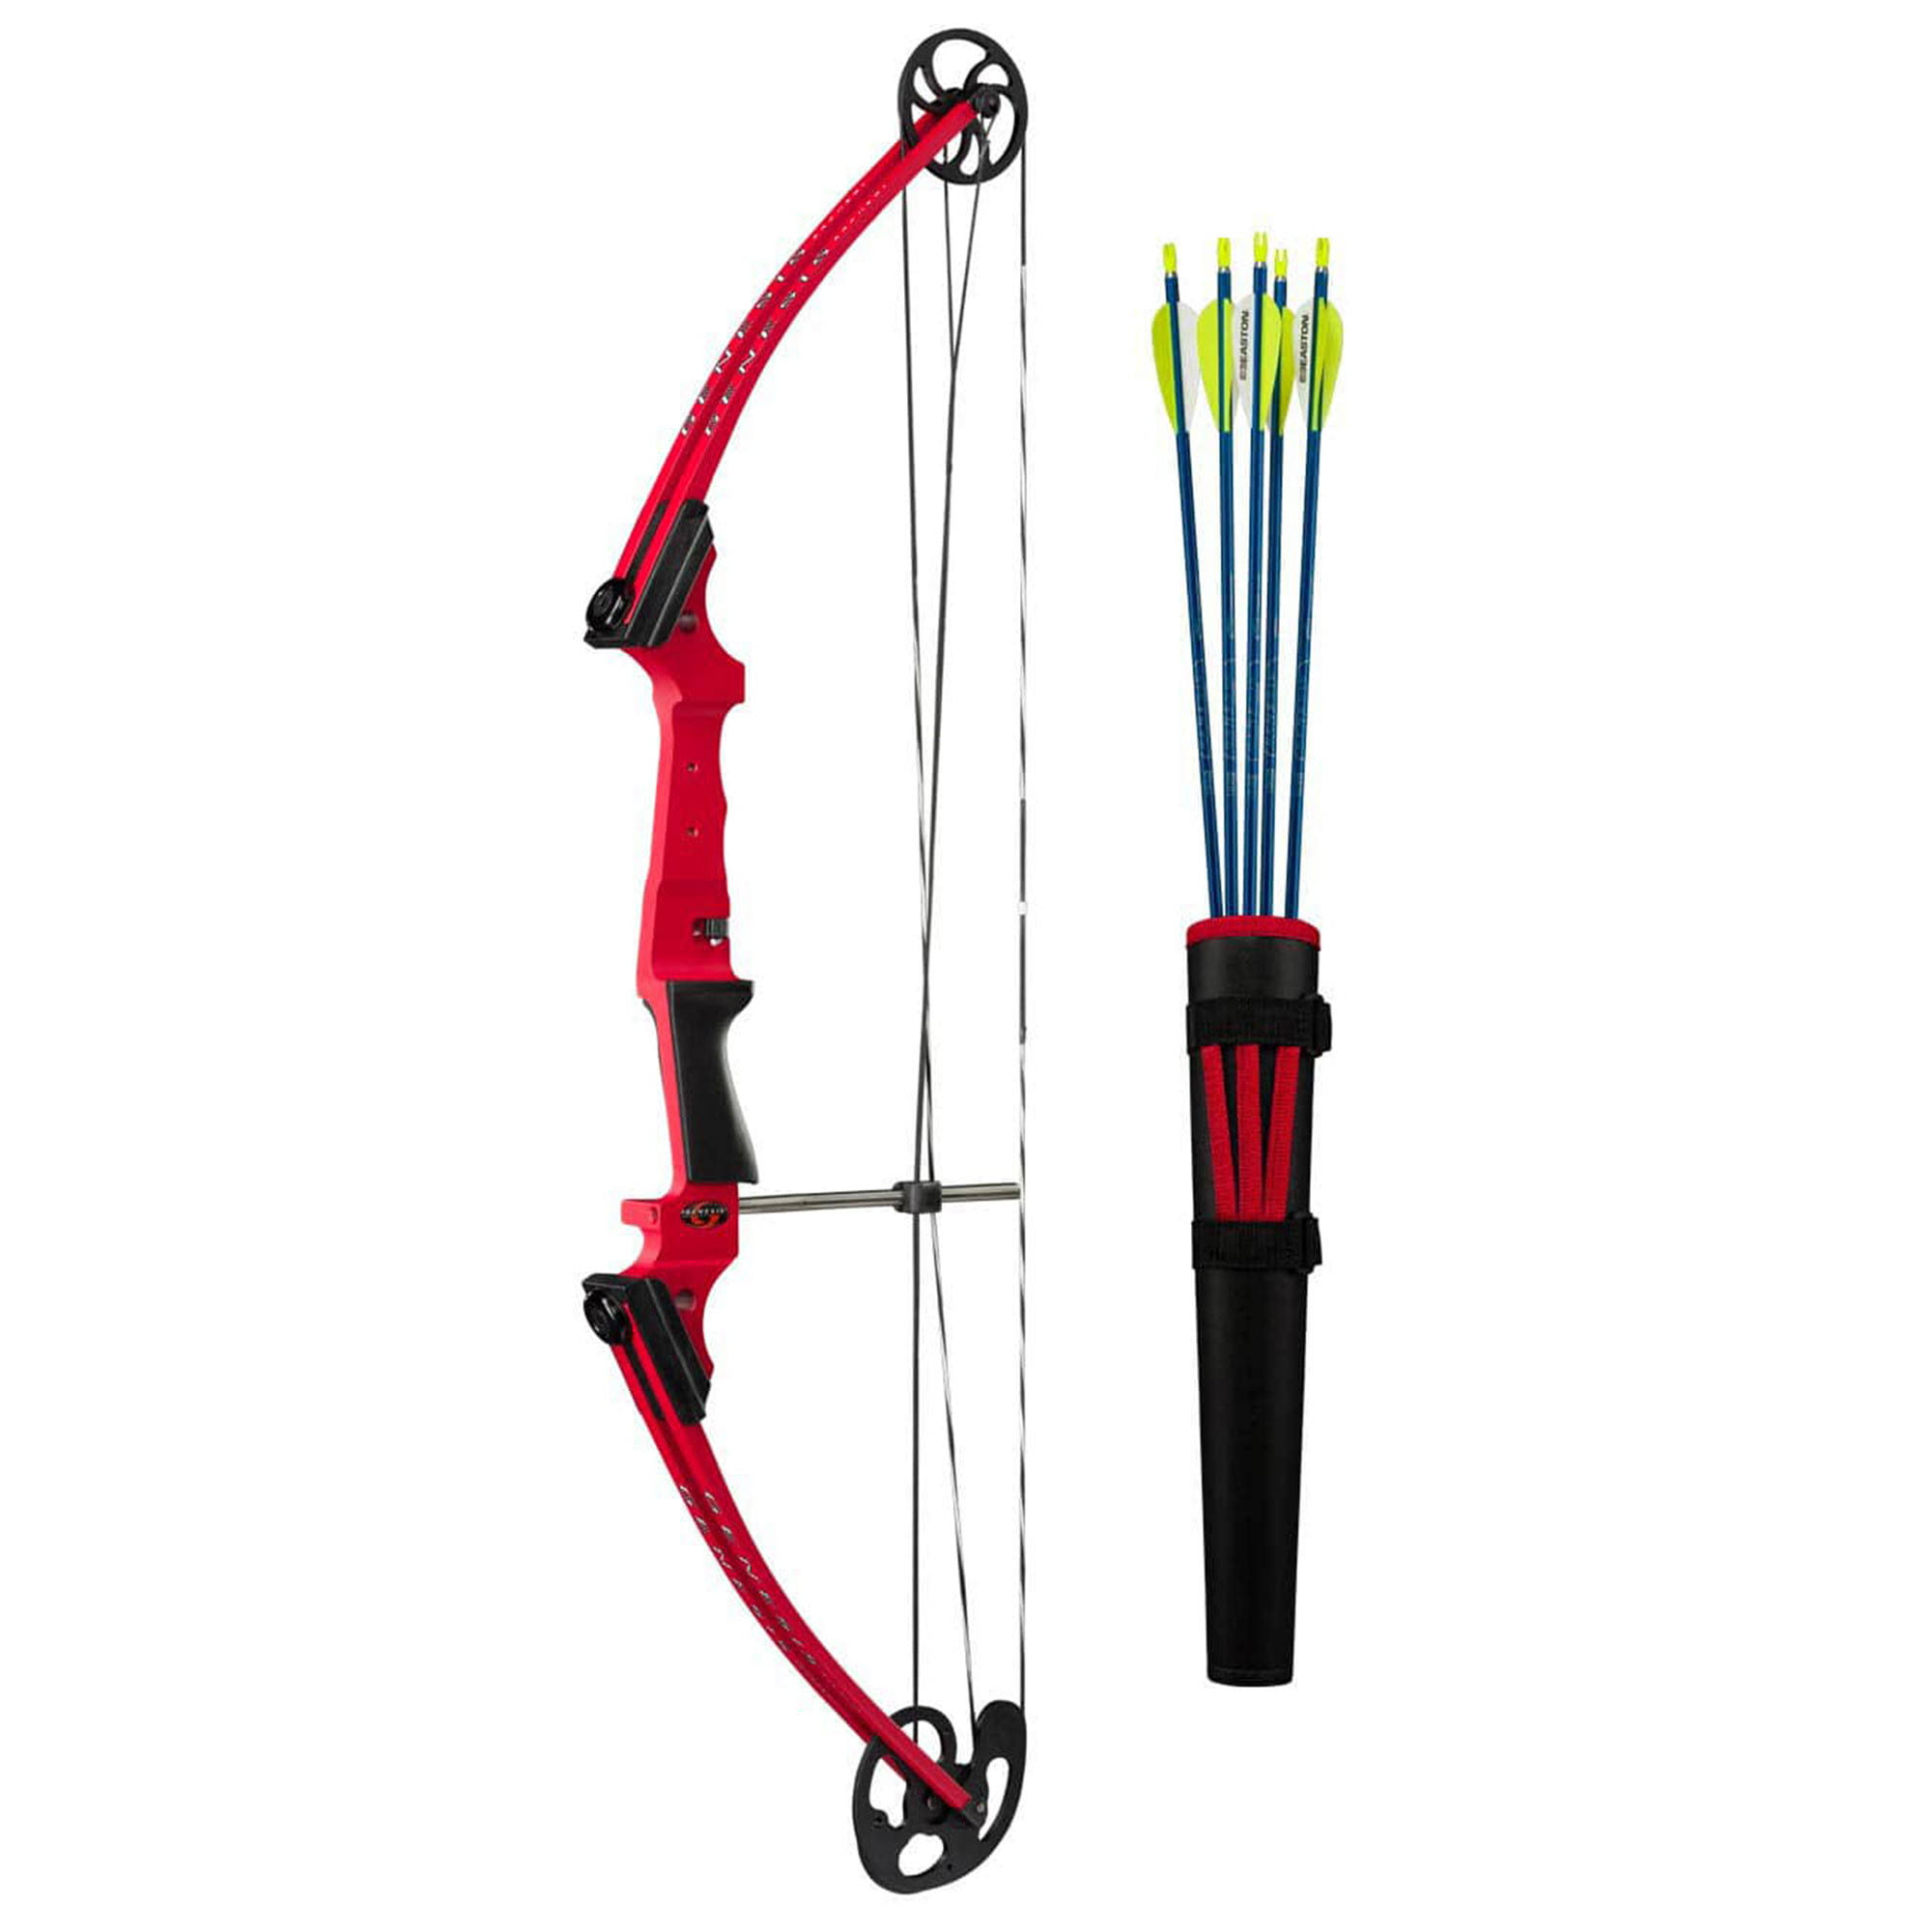 Genesis Original Righthand Compound Bow Kit - Red